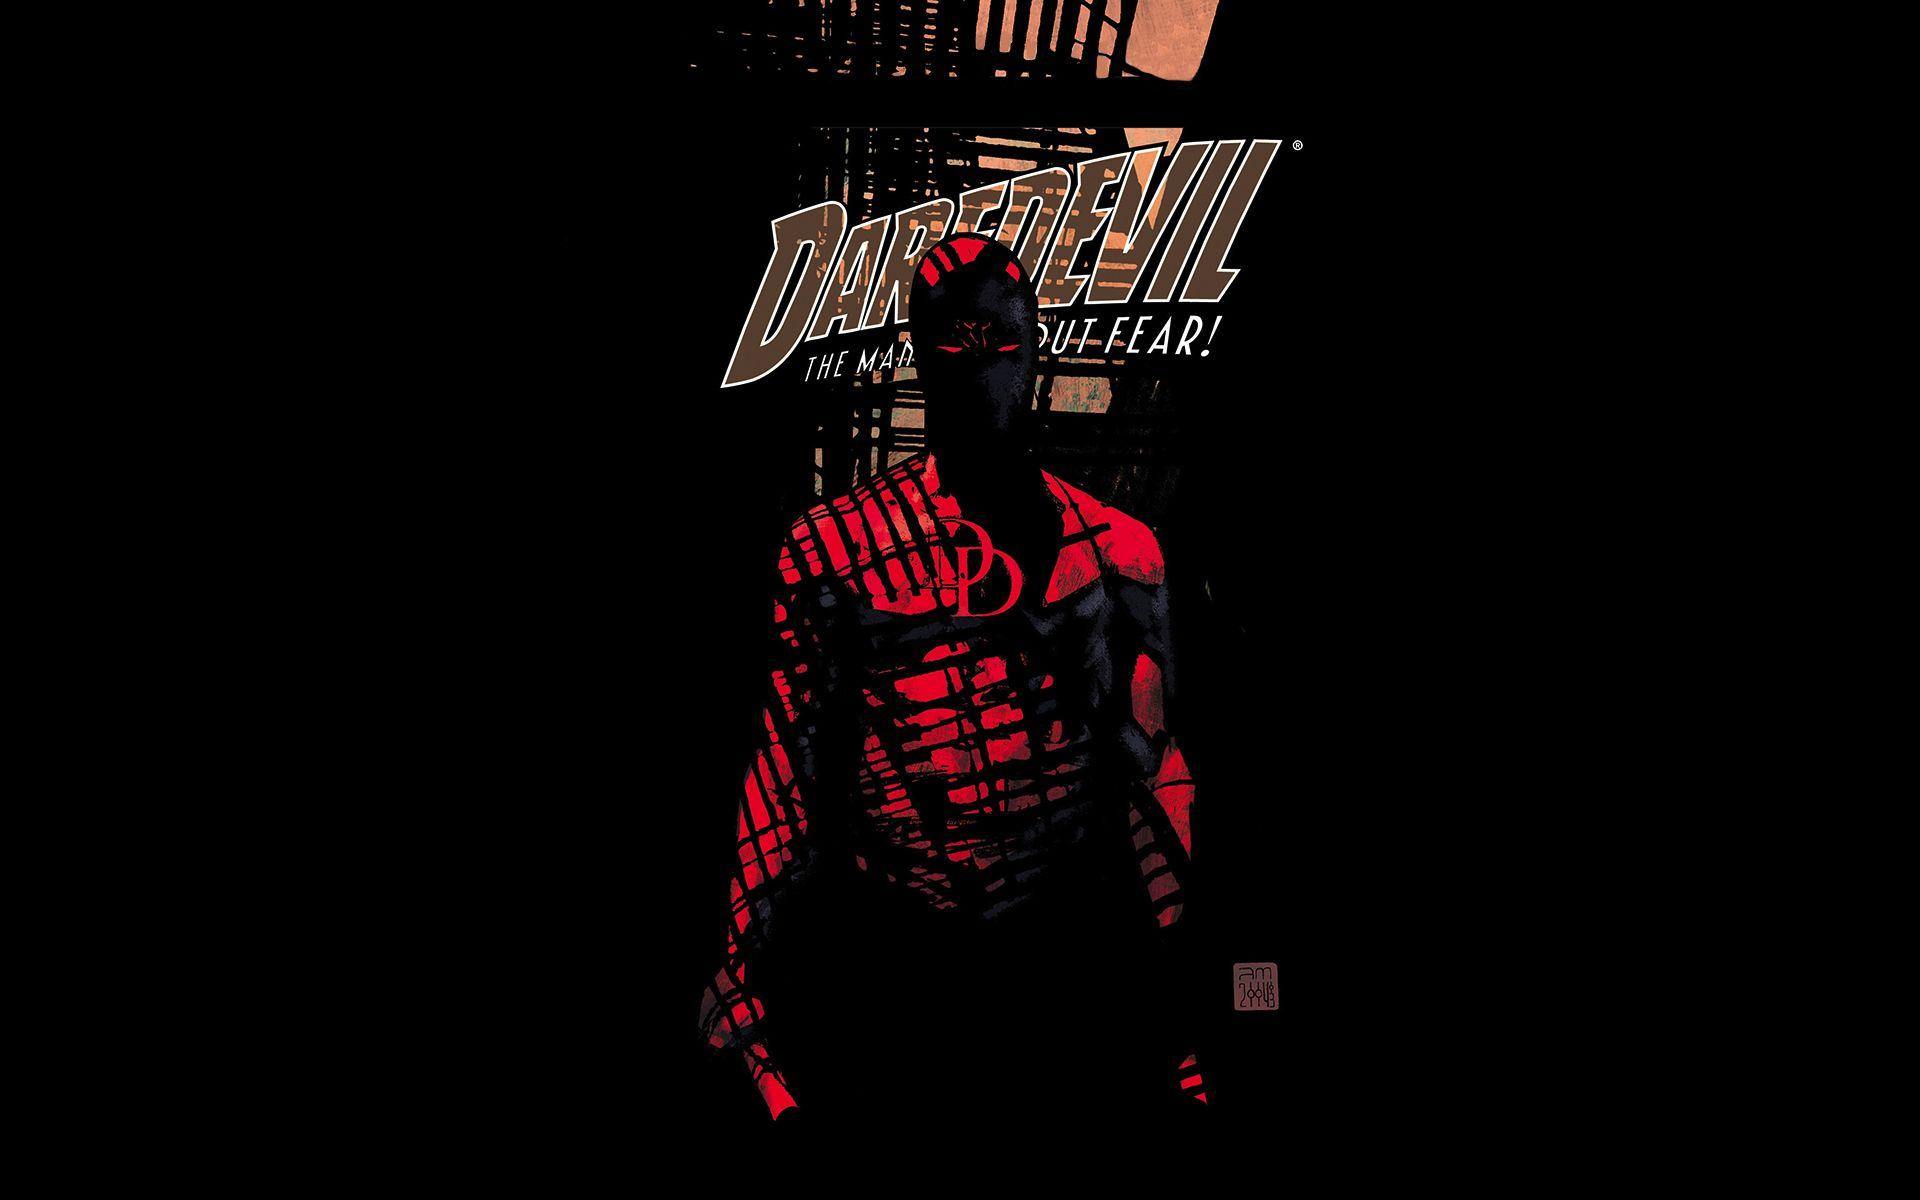 DAREDEVIL WALLPAPER I cant wait for the show, so I made myself a